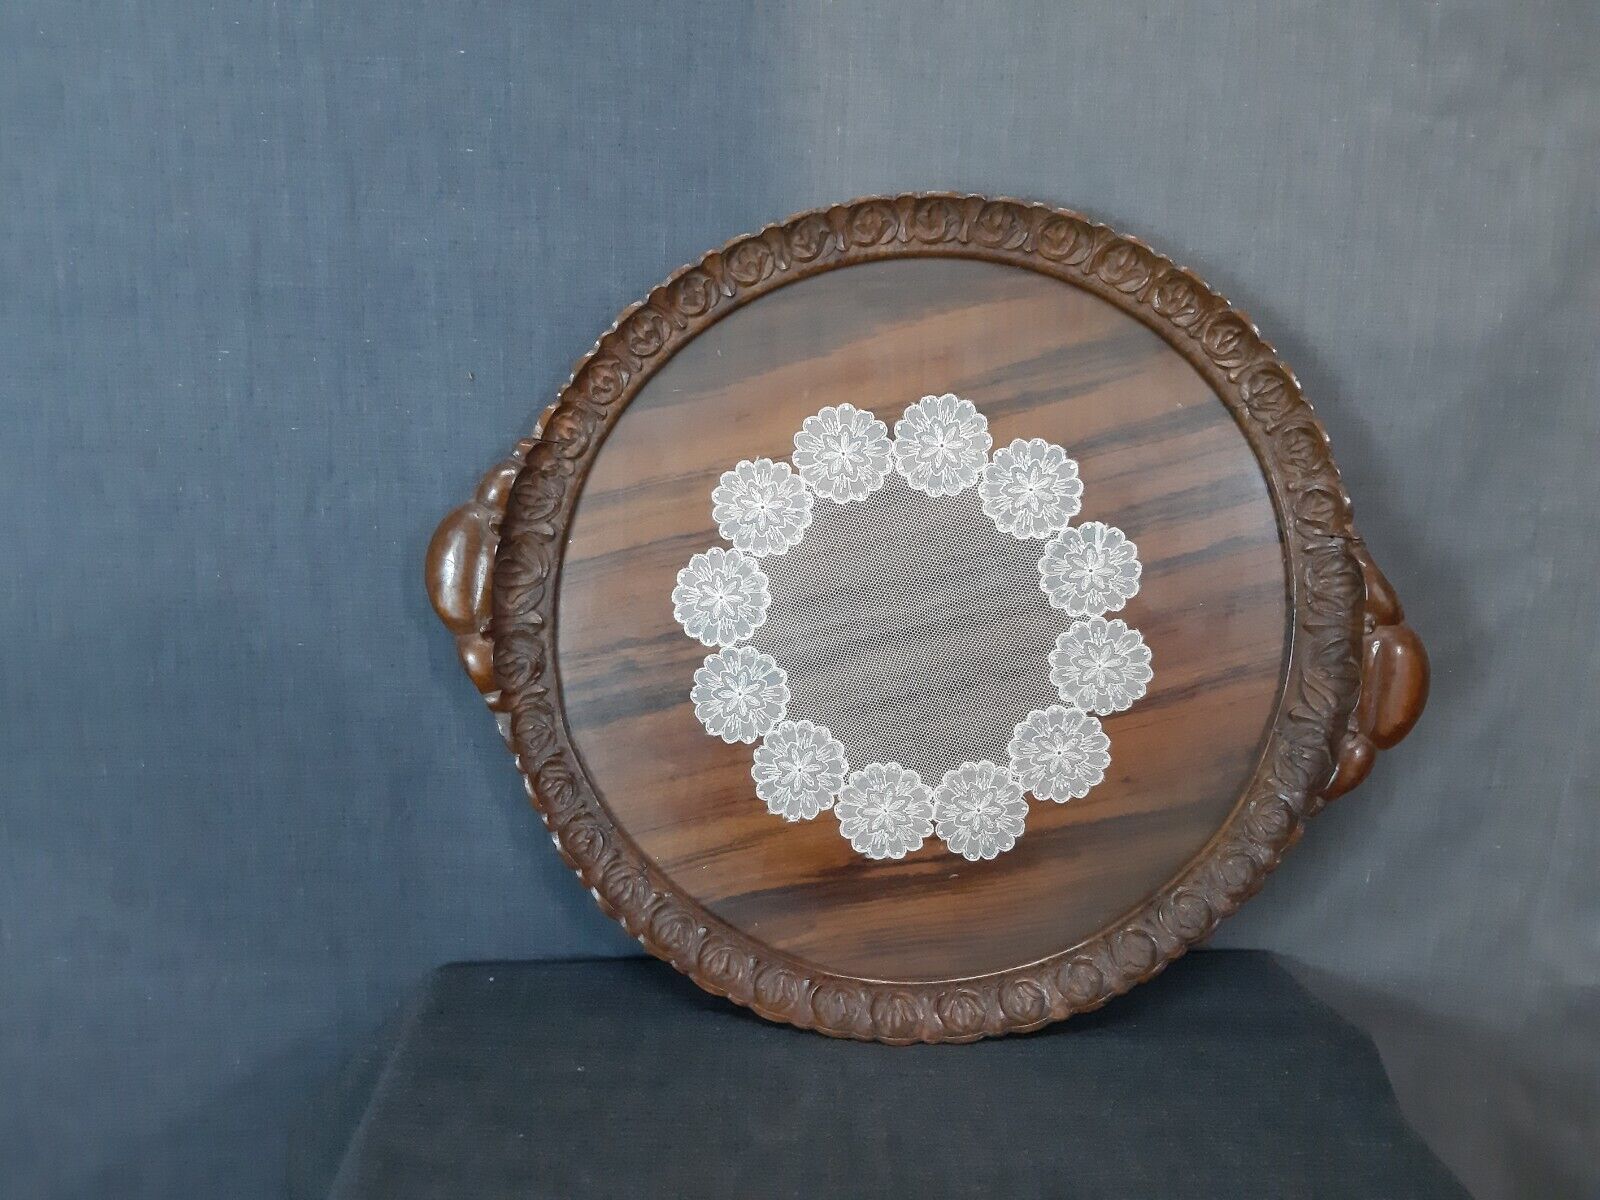 Old unique tray with fine wooden carving around the rim with lace under glass